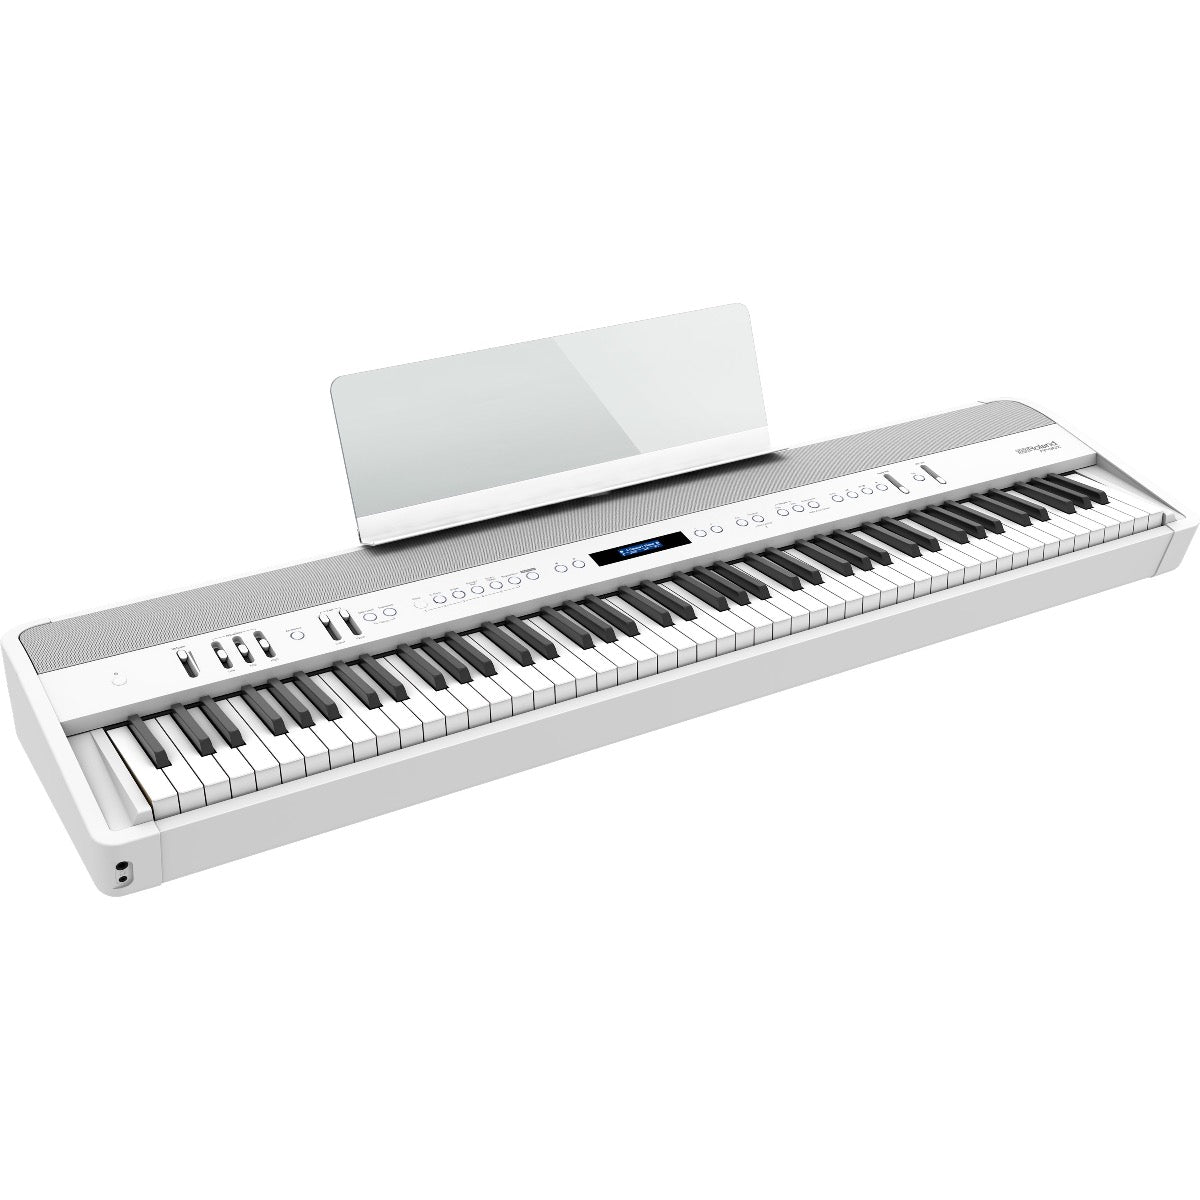 3/4 view of Roland FP-90X Digital Piano - White with music rest attached showing top, front and left side